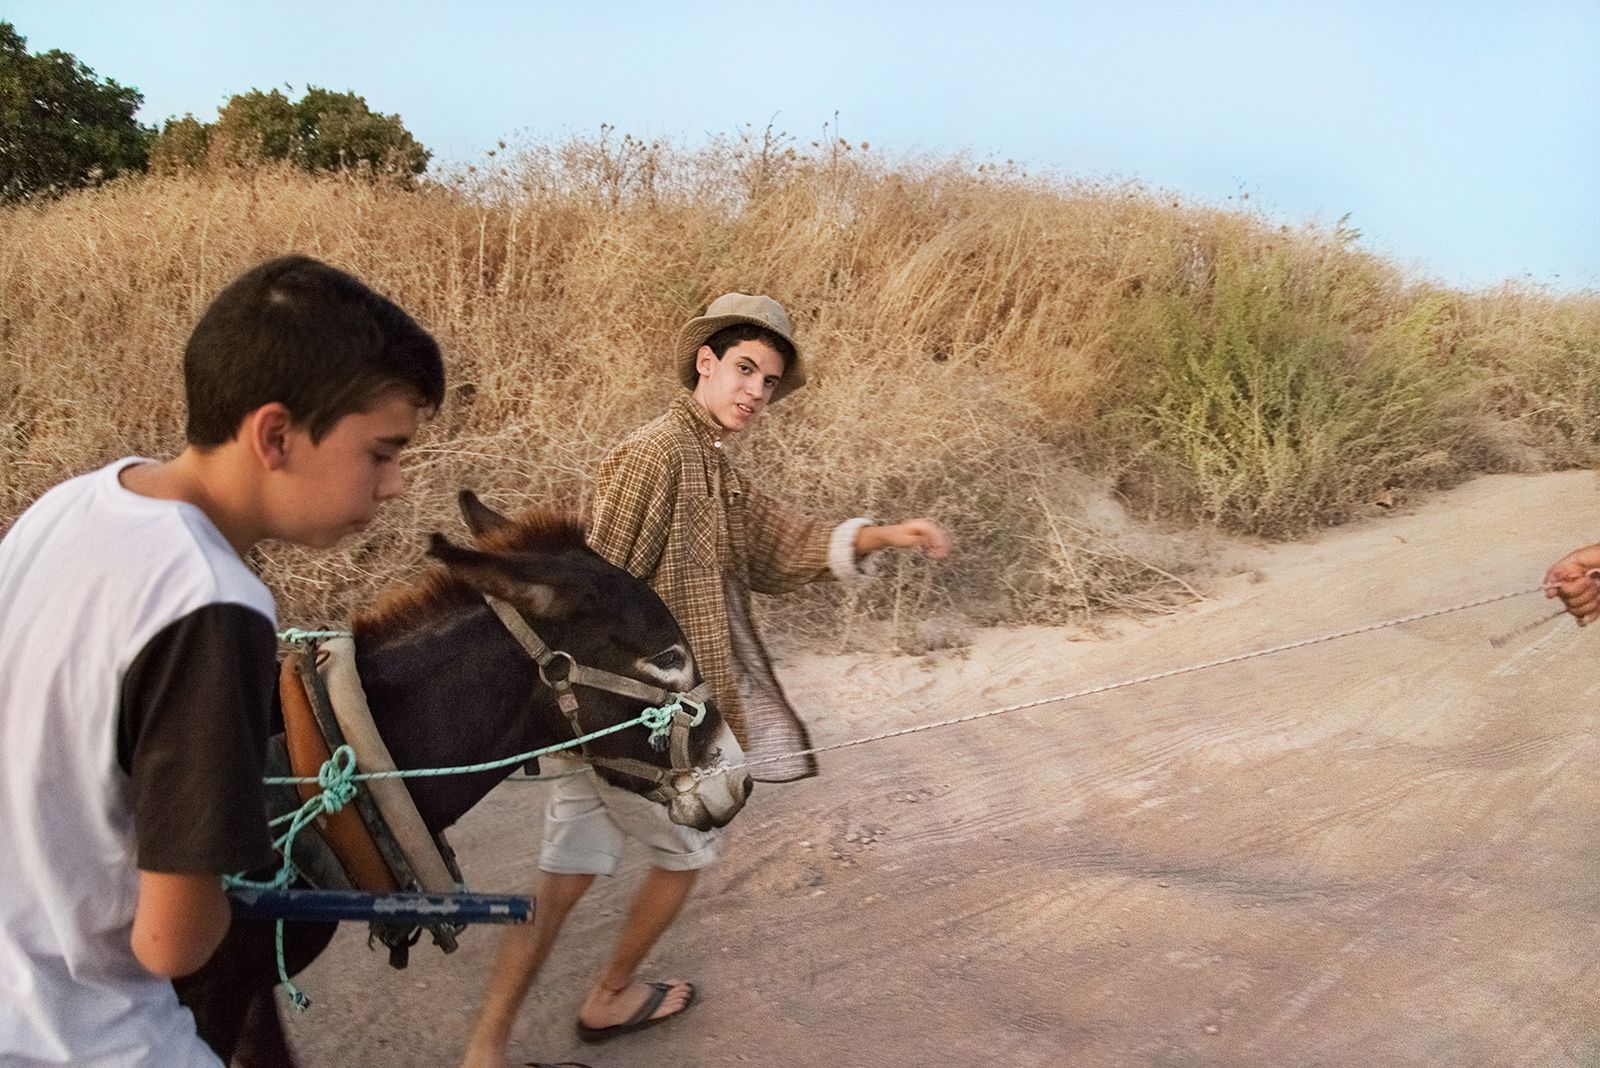 © Daniel Rolider - Amit (c.) and his friend Omer, walking our donkey uphill to Zaid's Hills, Kiryat Tivon, Israel, October 2016.